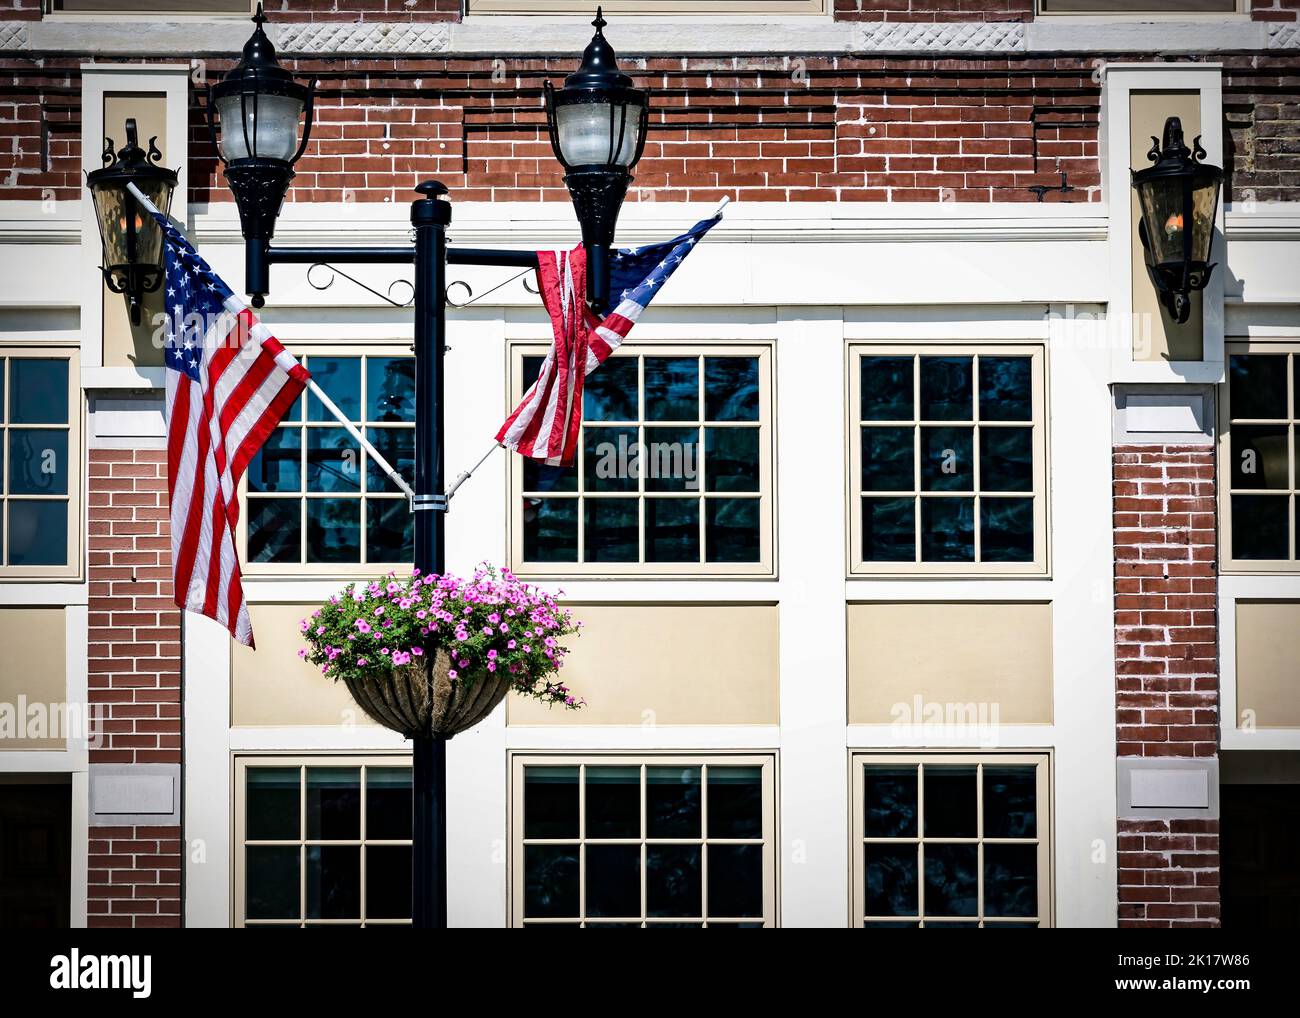 The flags and flowers on a light pole sitting on a city street in Manitowoc, Wisconsin. Stock Photo